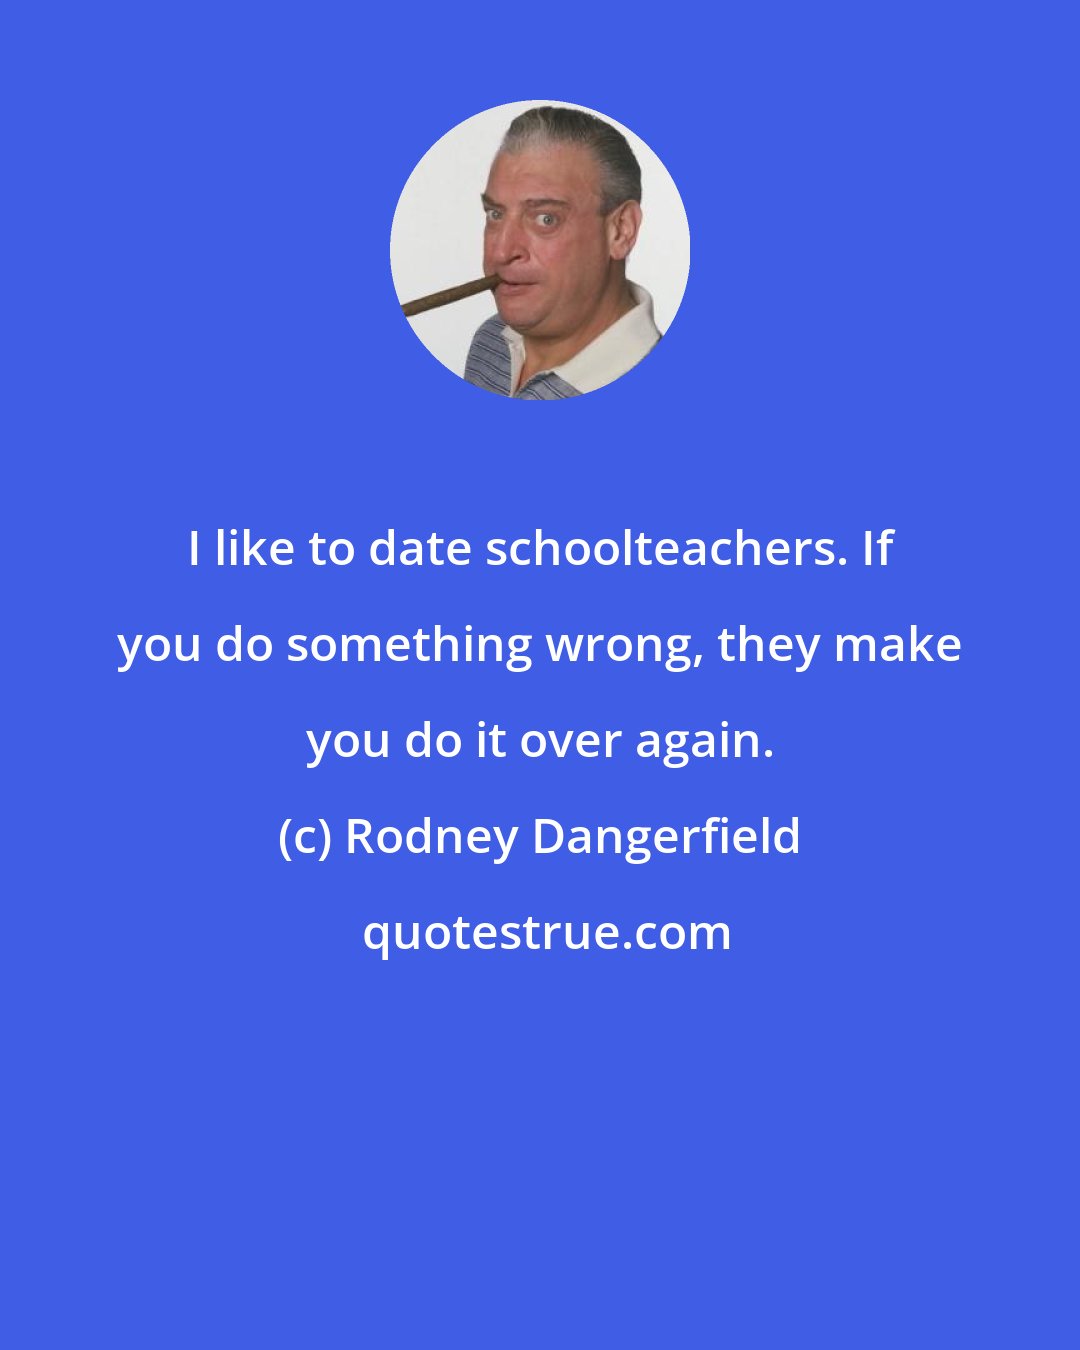 Rodney Dangerfield: I like to date schoolteachers. If you do something wrong, they make you do it over again.